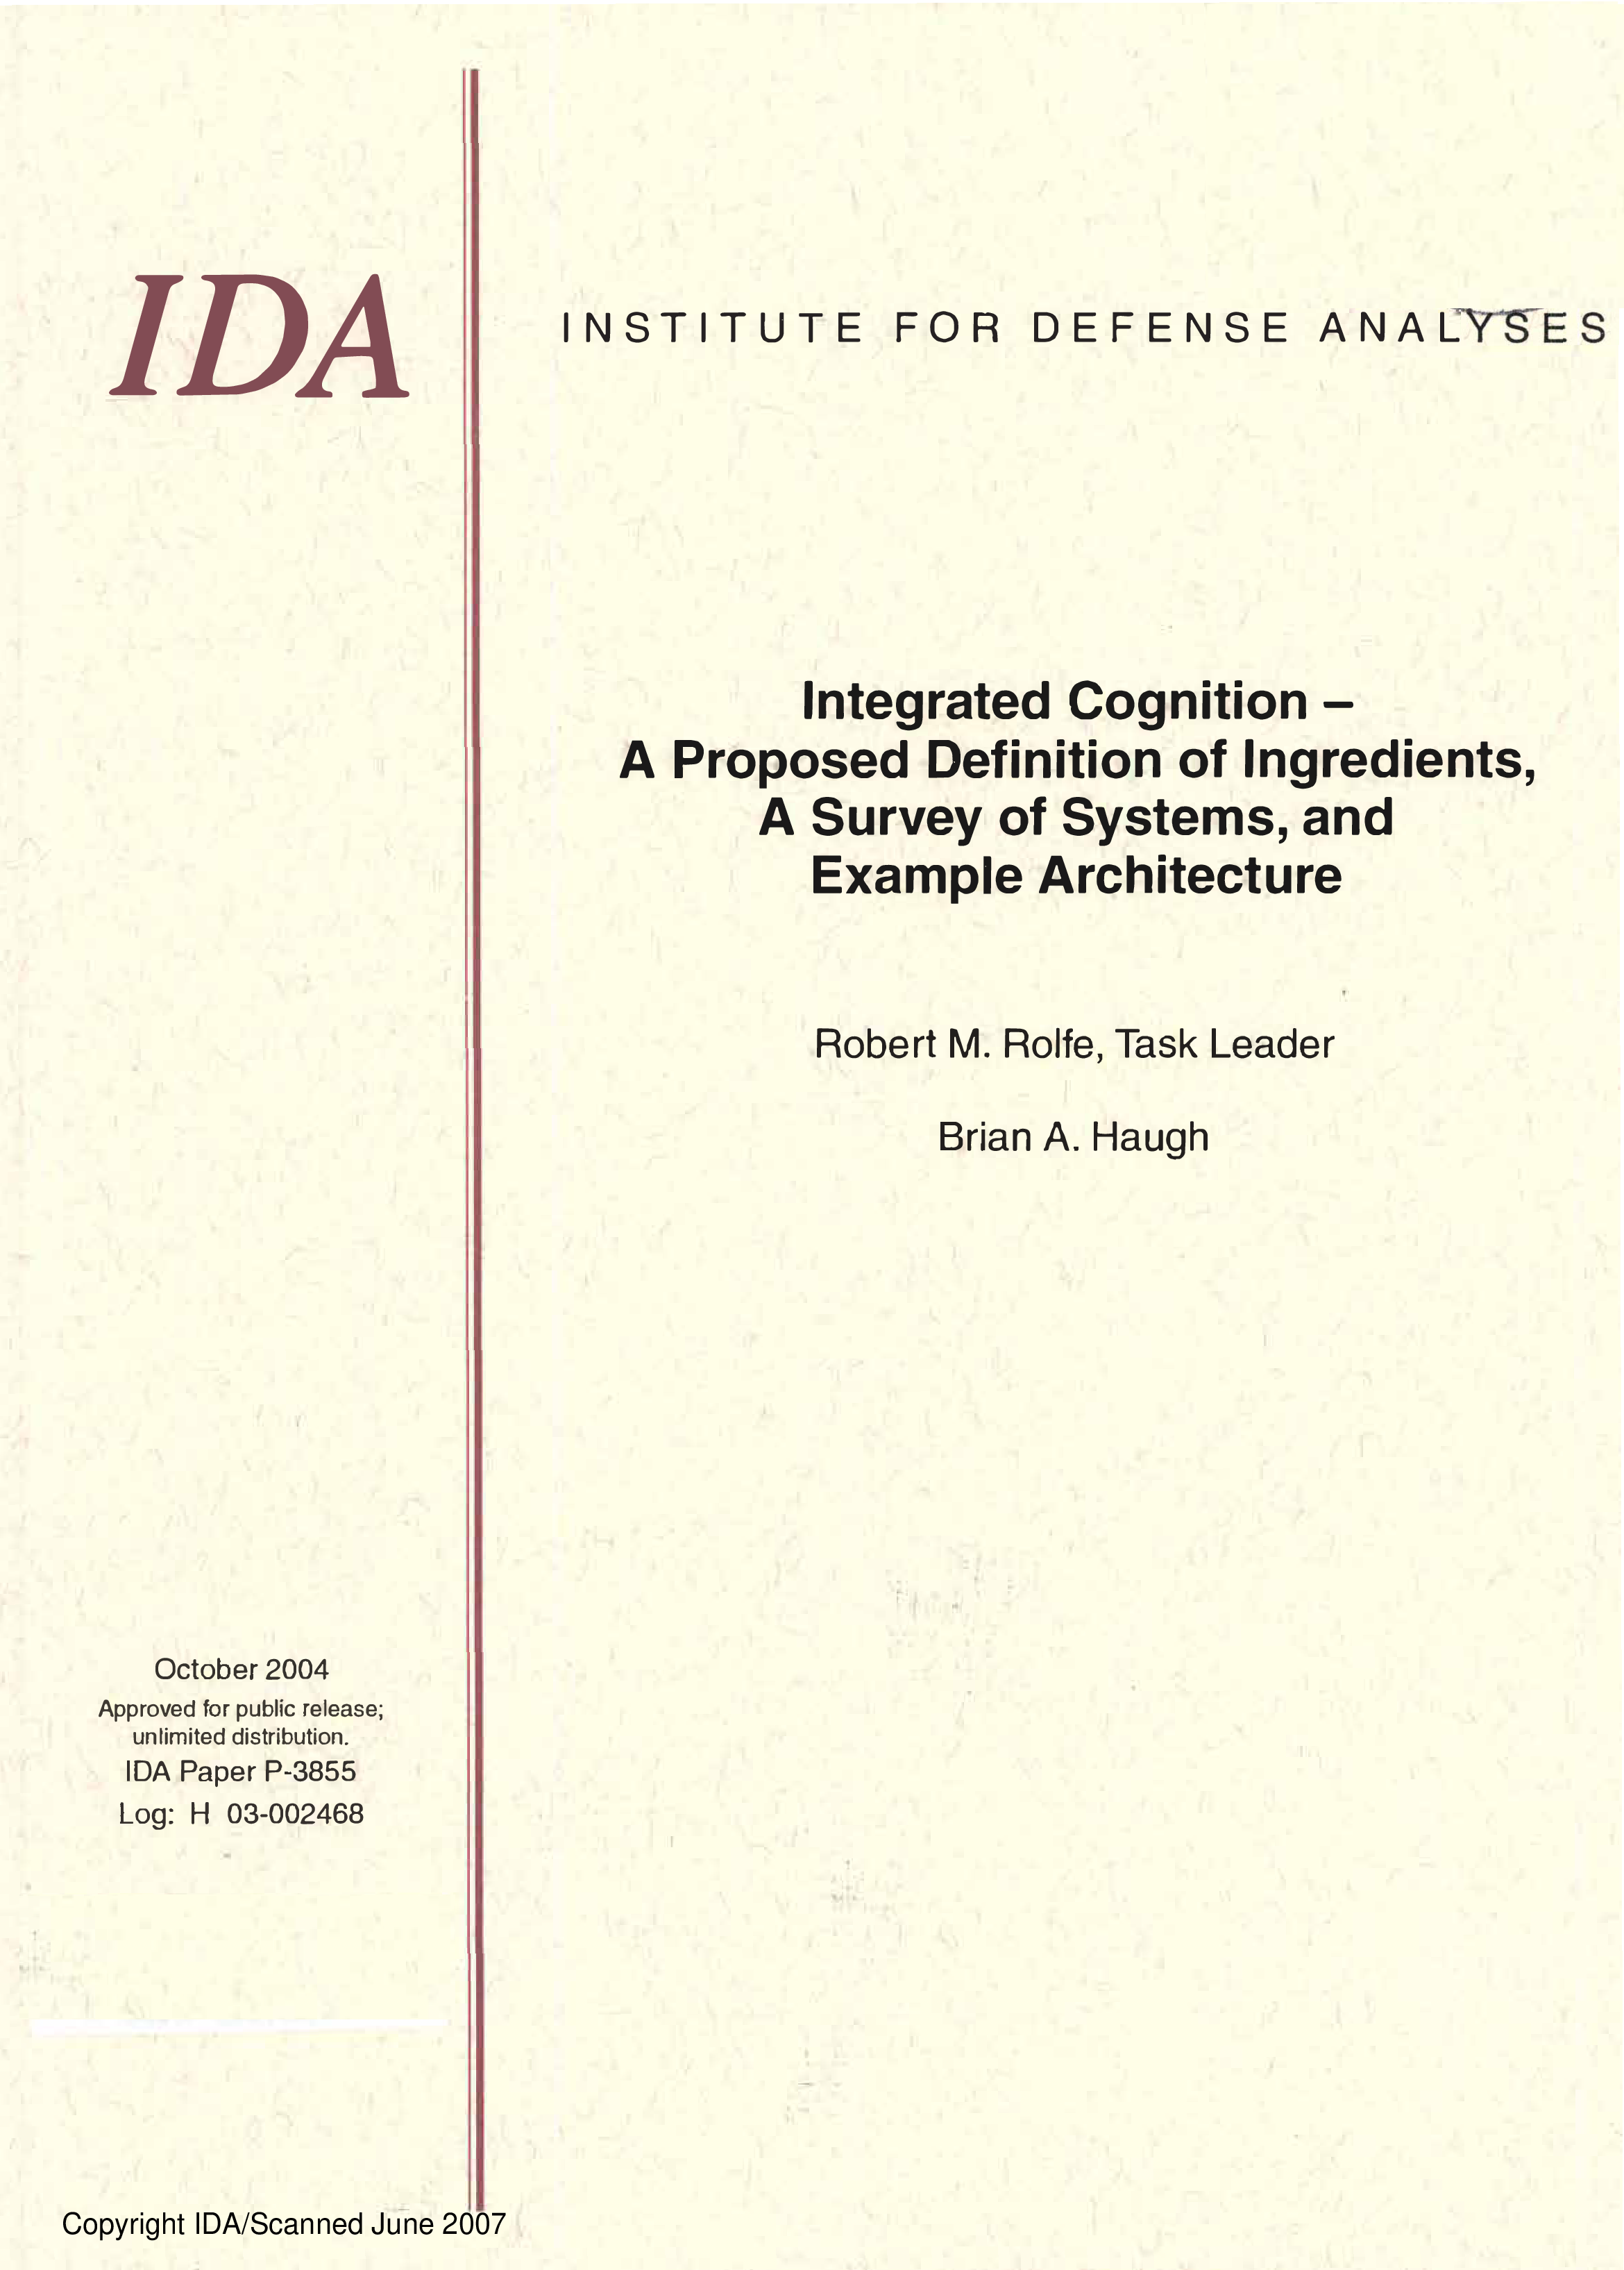 Integrated Cognition - A Proposed Definition of Ingredients, A Survey of Systems, and Example Architecture